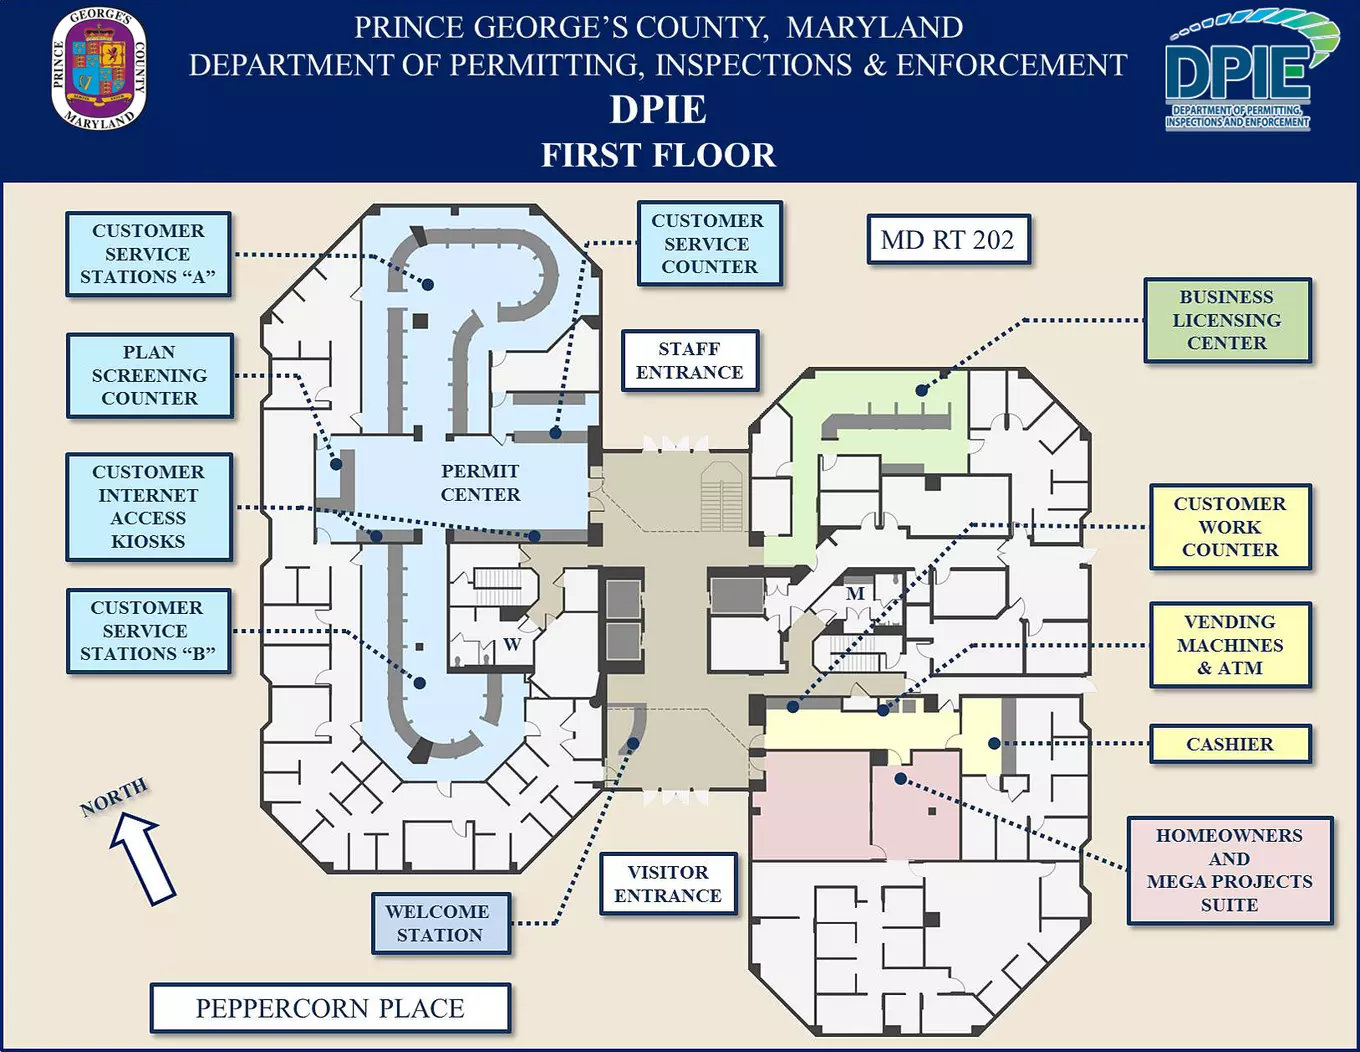 DPIE Building Map of First Floor Customer Service areas of 9400 Peppercorn Place, Largo, MD